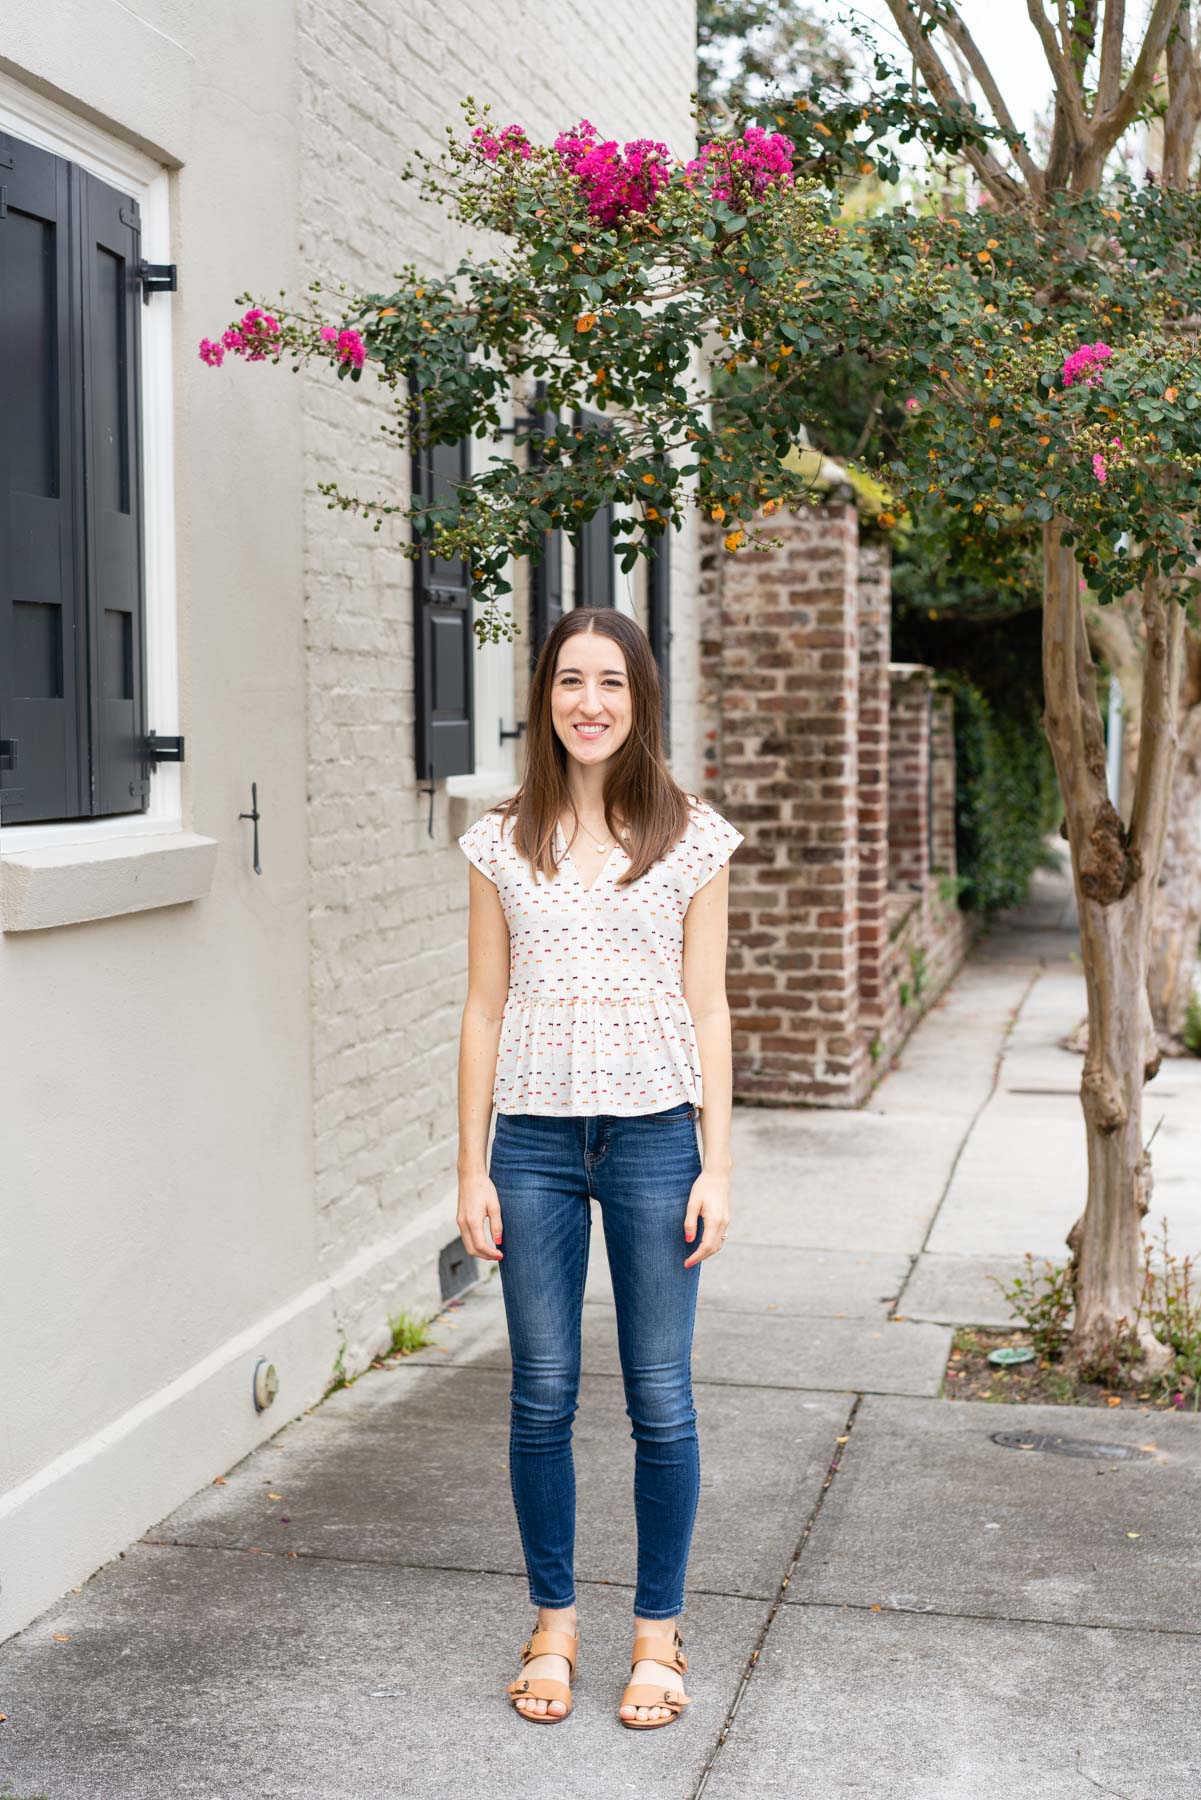 Woman in denim jeans and a white blouse standing on the sidewalk demonstrating how not to pose for a photoshoot